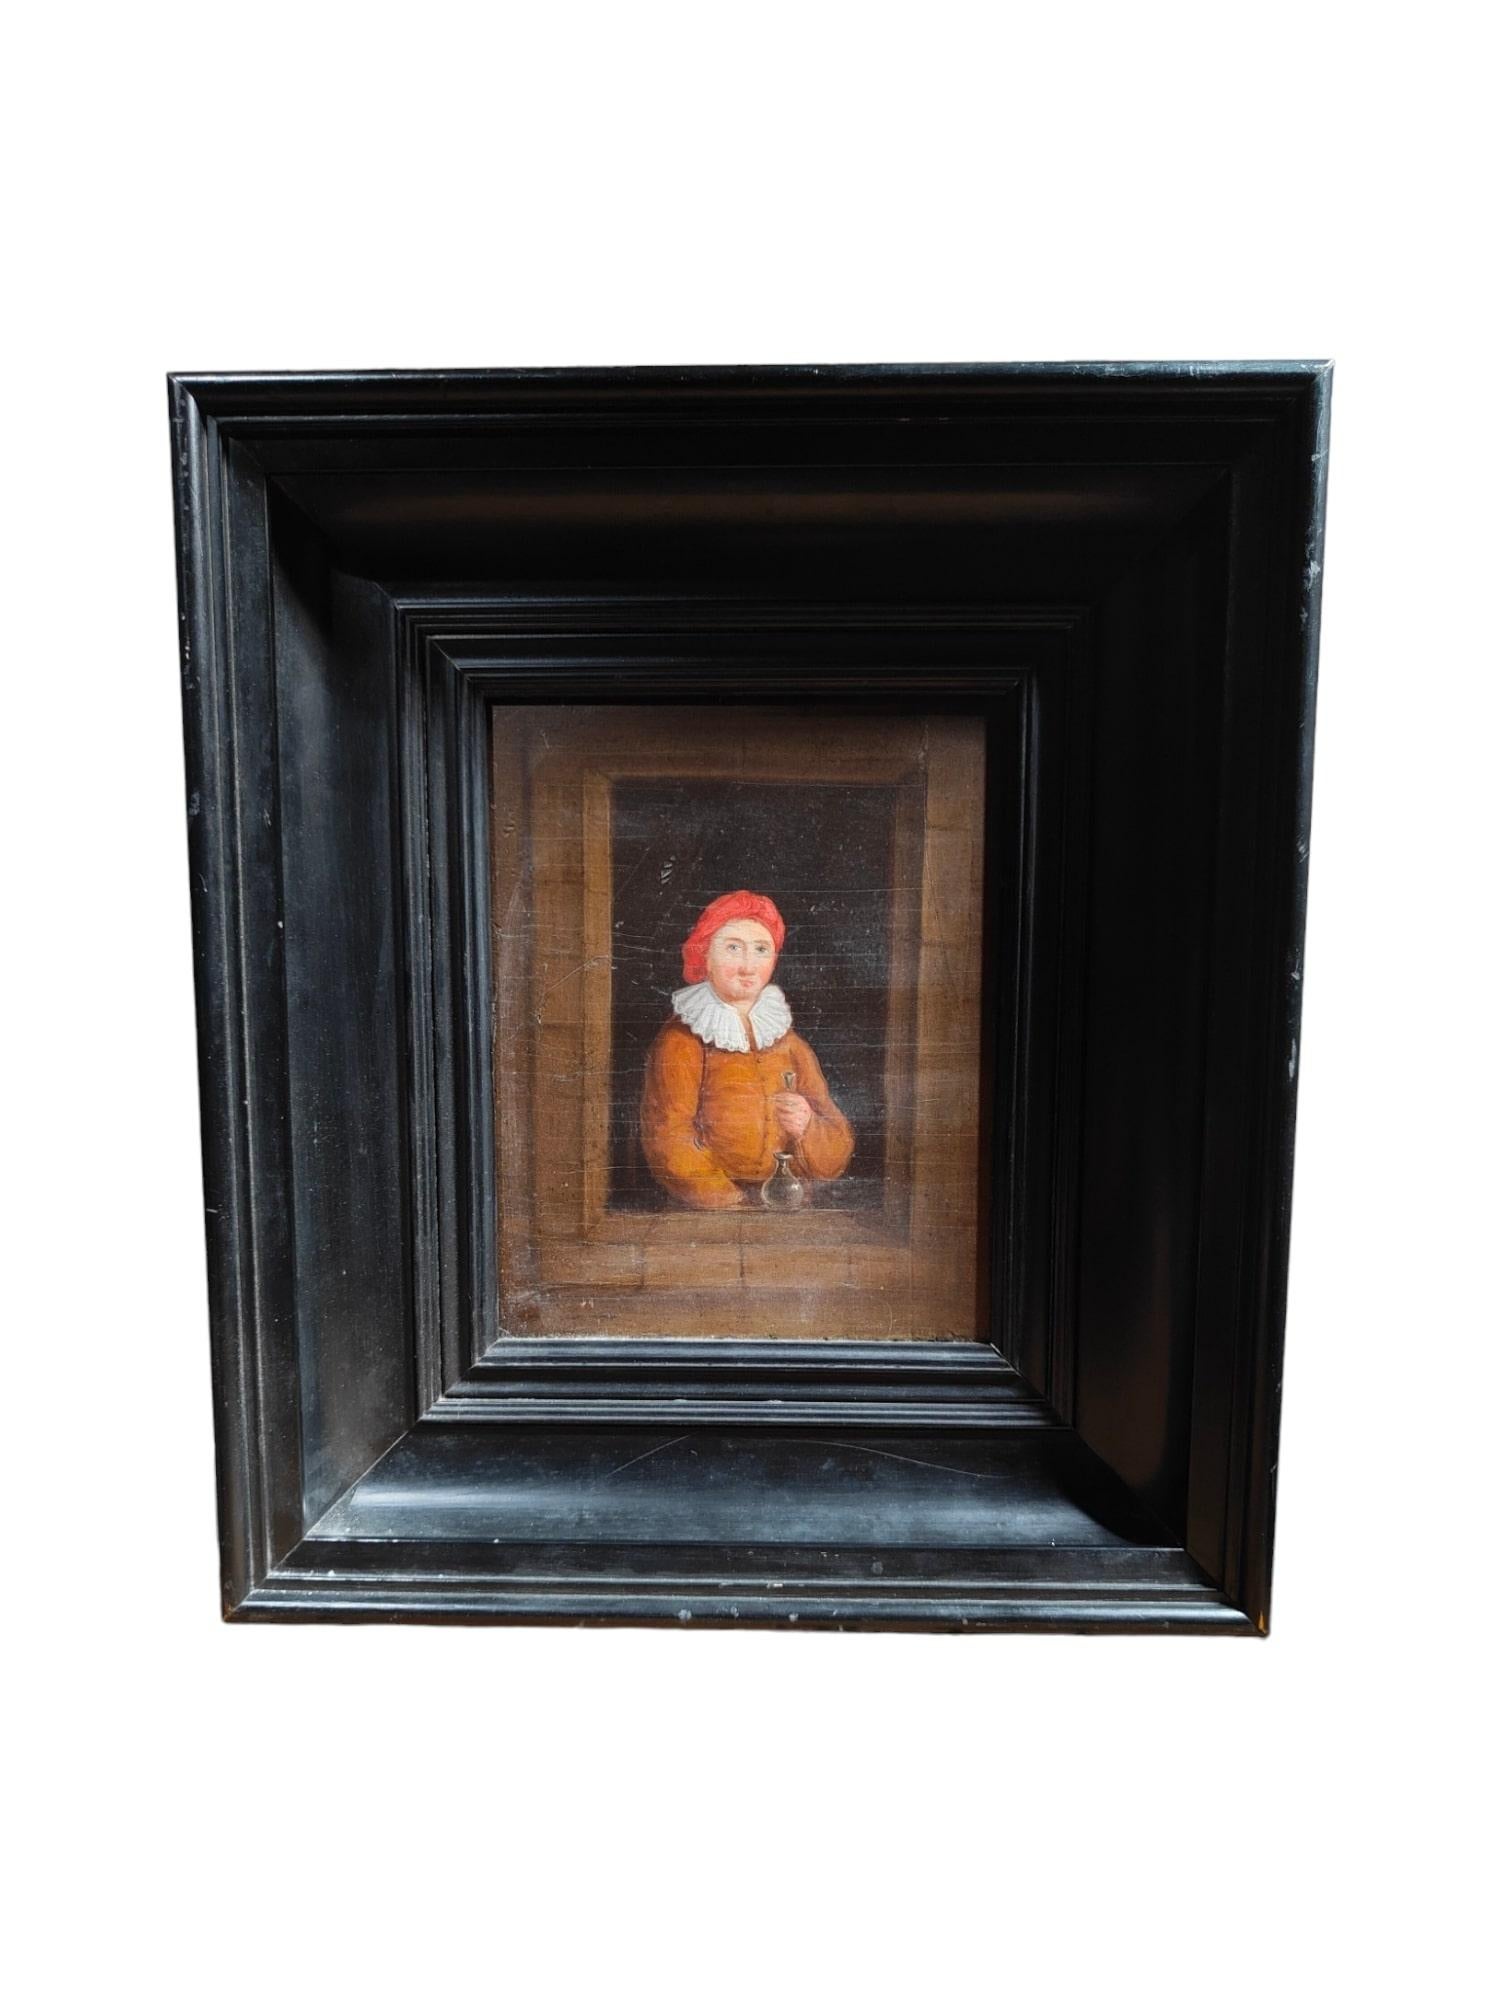 This elegant Dutch portrait, painted in oil on a wood panel, is a remarkable piece that encapsulates the distinction and artistic mastery of the 17th century. Measuring 21x17 cm without the frame, this timeless artwork has been later framed in